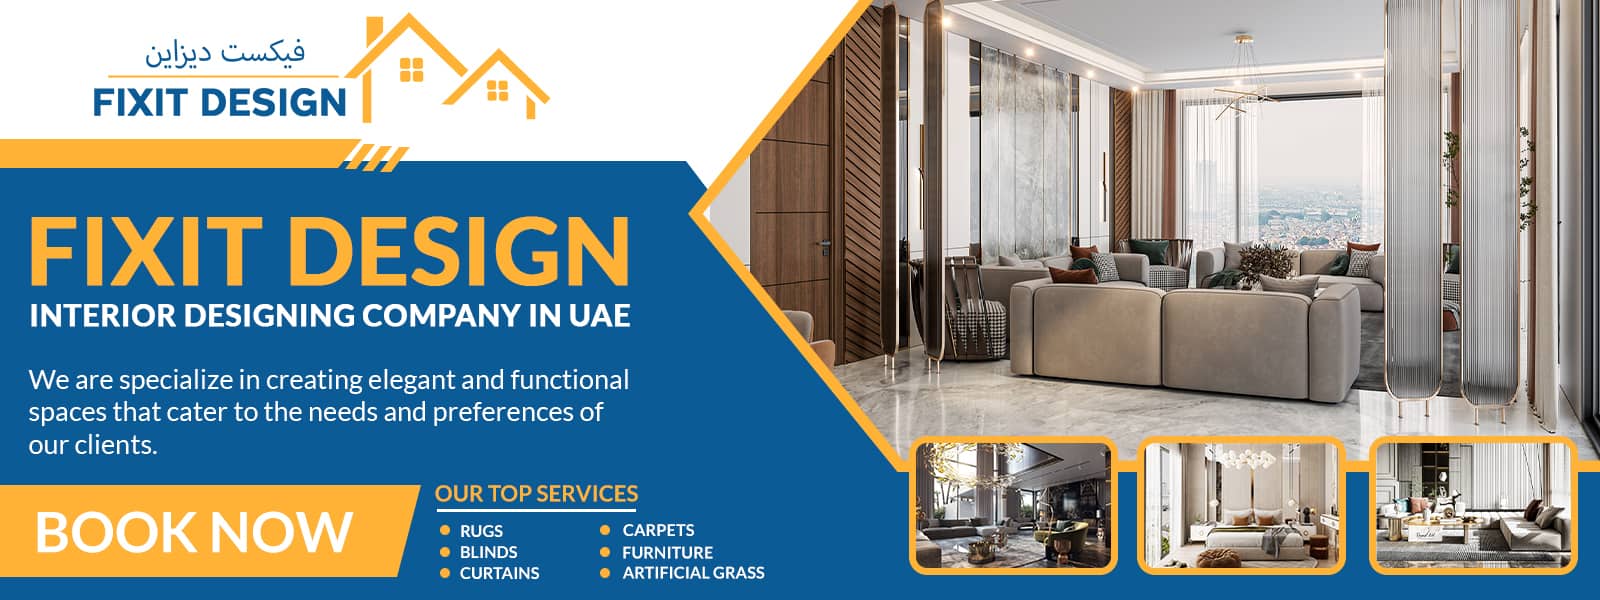 Fix it Design provides luxury interior design in Dubai at an affordable price range. We aim to add value to your place by providing the modern interior look.